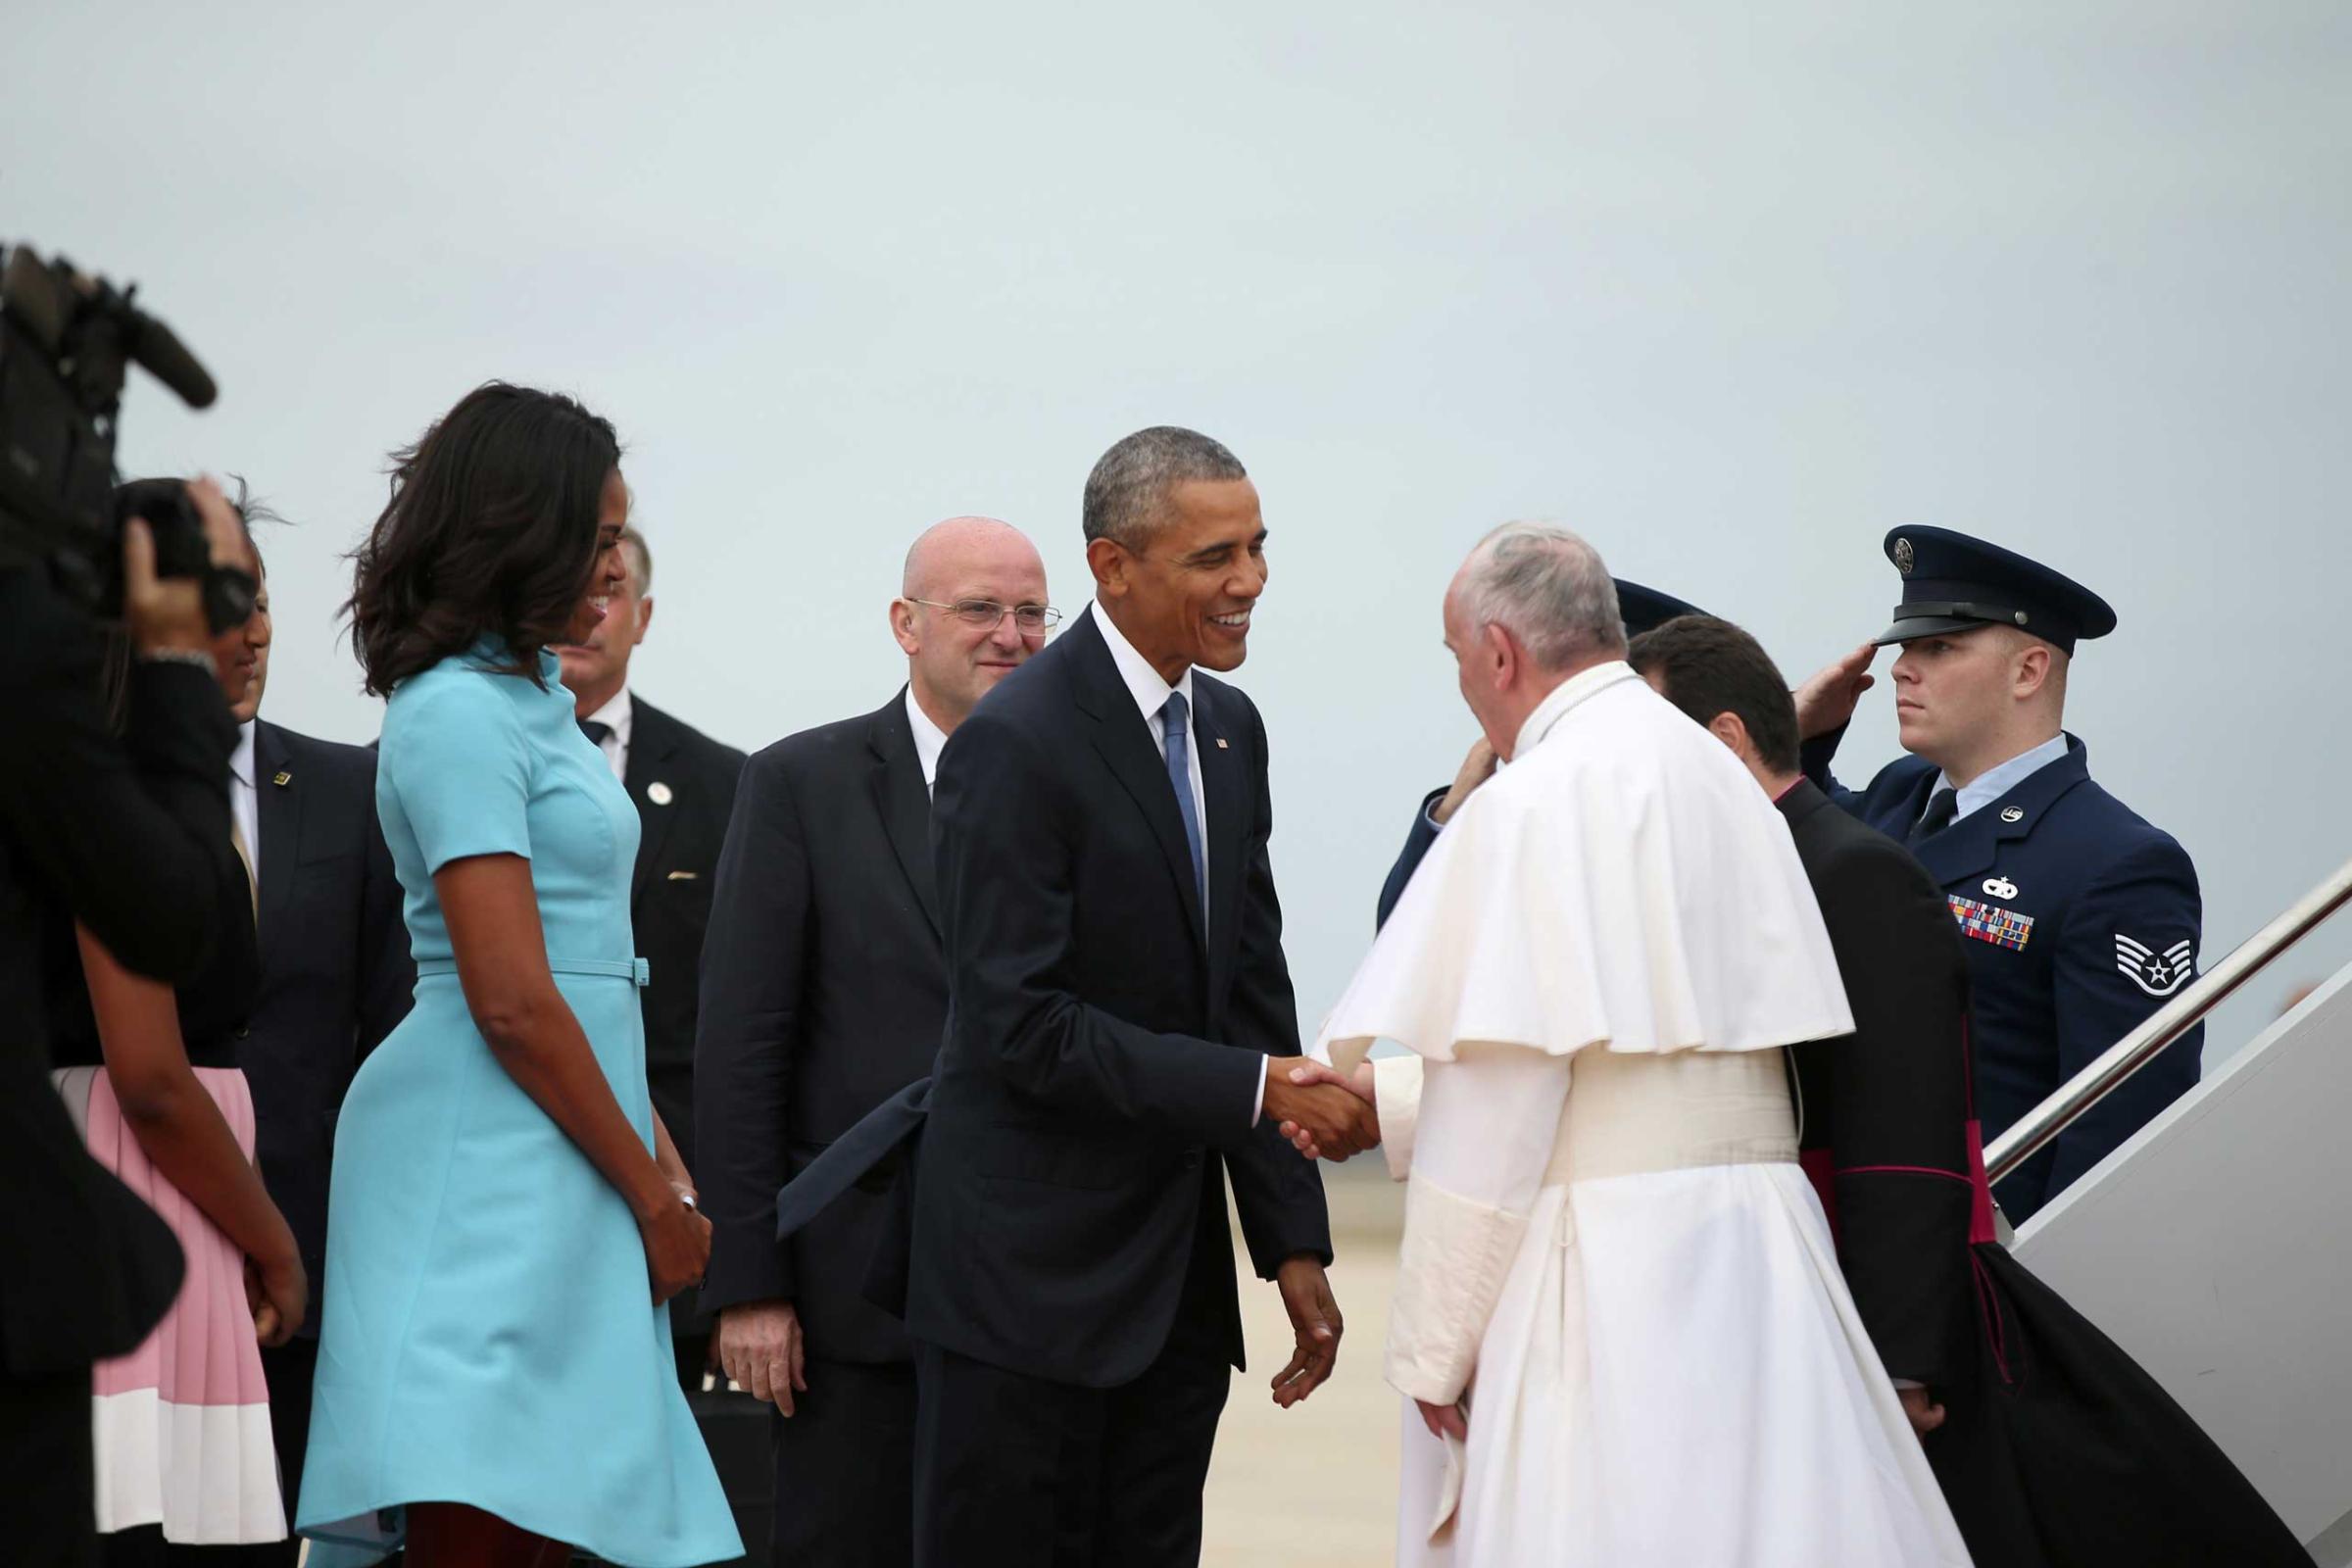 President Barack Obama, first lady Michelle Obama, and others, greet Pope Francis upon his arrival at Andrews Air Force Base, Md., on Sept. 22, 2015.